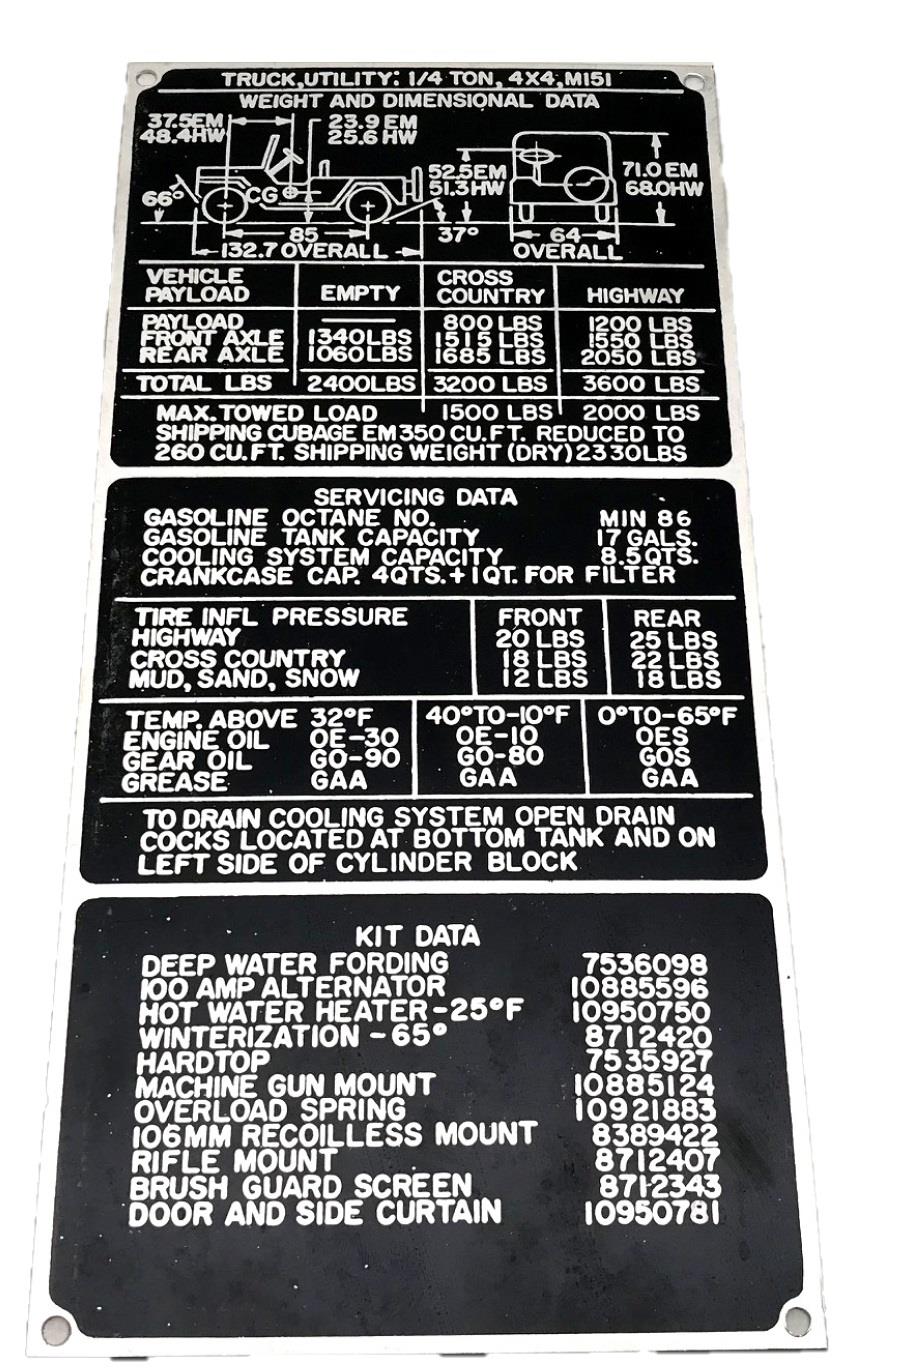 DT-546 | DT-546 M151 Weight and Dimensional Data Plate (3).jpg